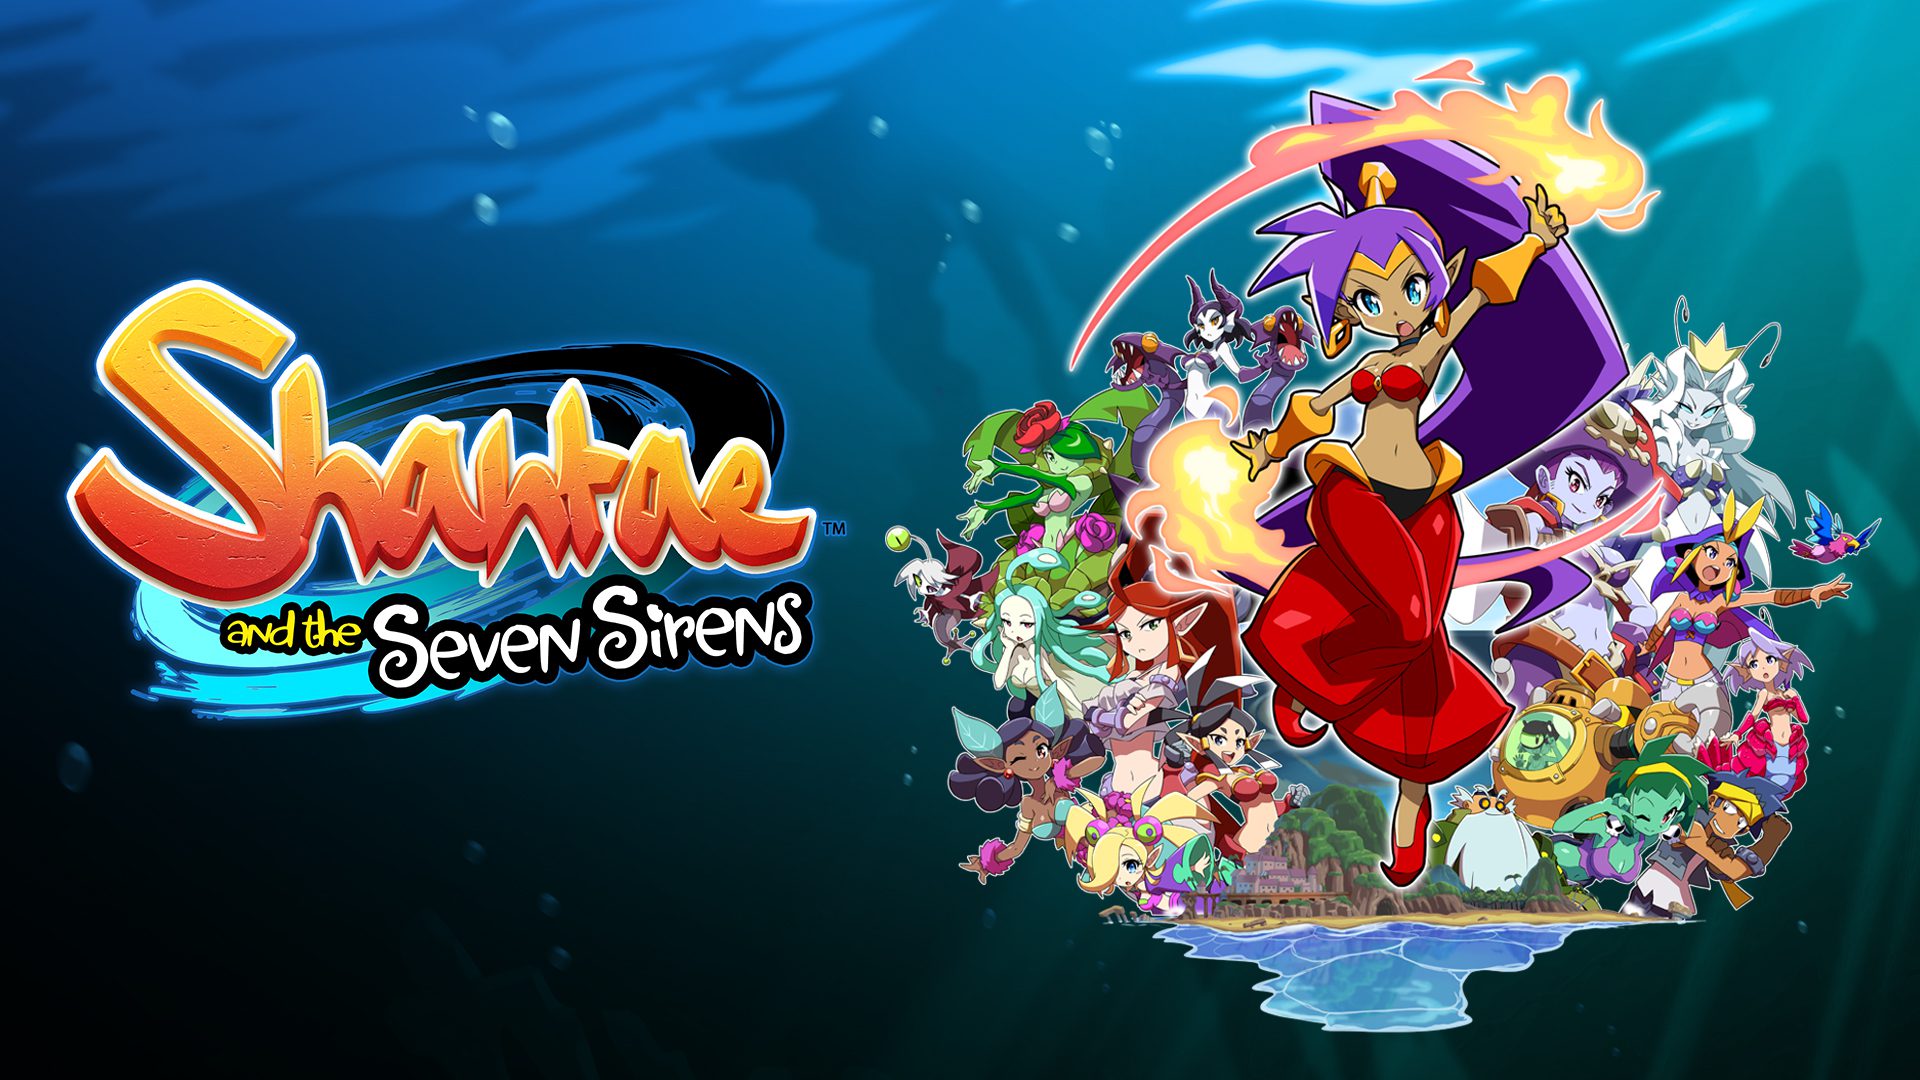 Shantae and the Seven Sirens review: waifus as far as the eye can see